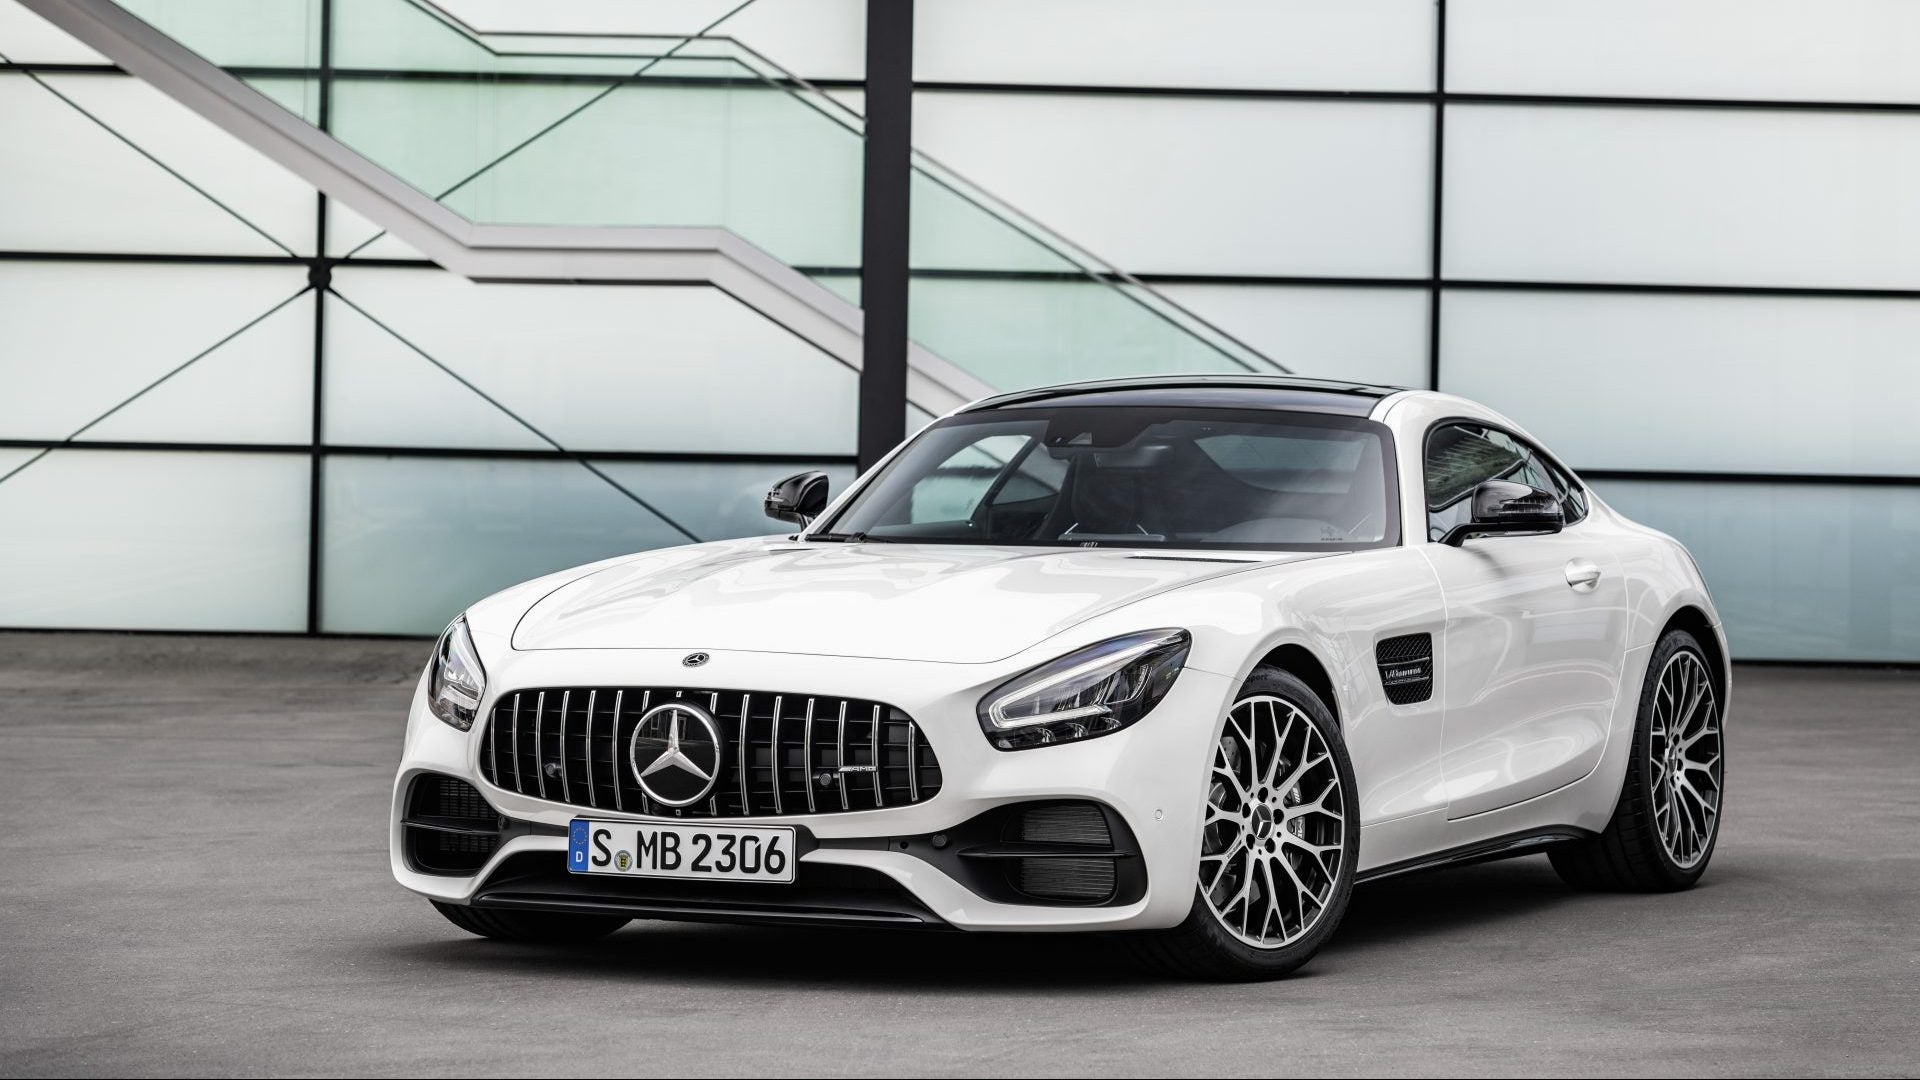 2019 Mercedes-AMG GT Line: New Screens and Tech Enhance the Facelifted German Brute